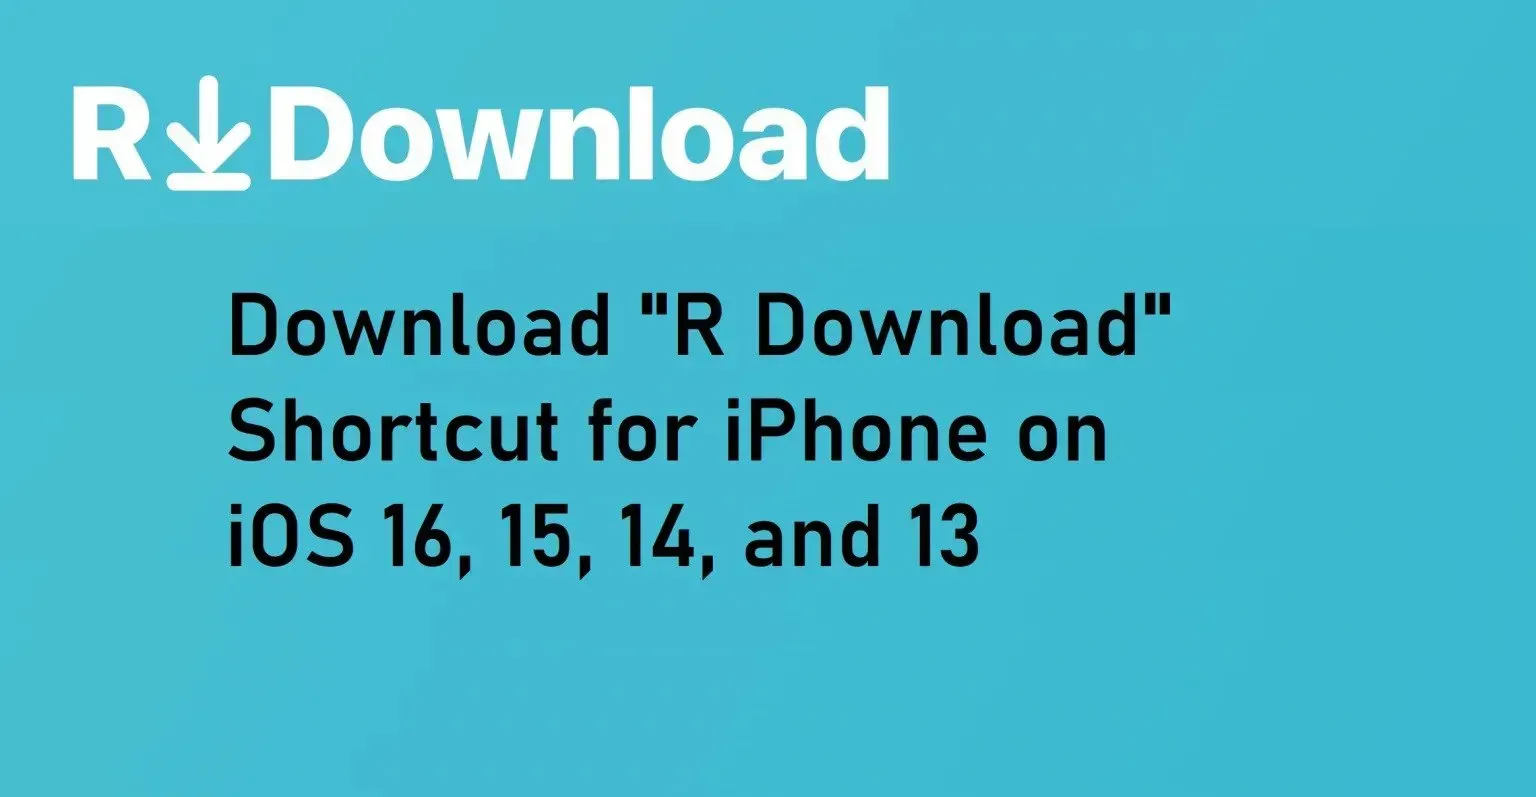 R Download for iOS 16: How to Install the R⤓Download shortcut on the iPhone